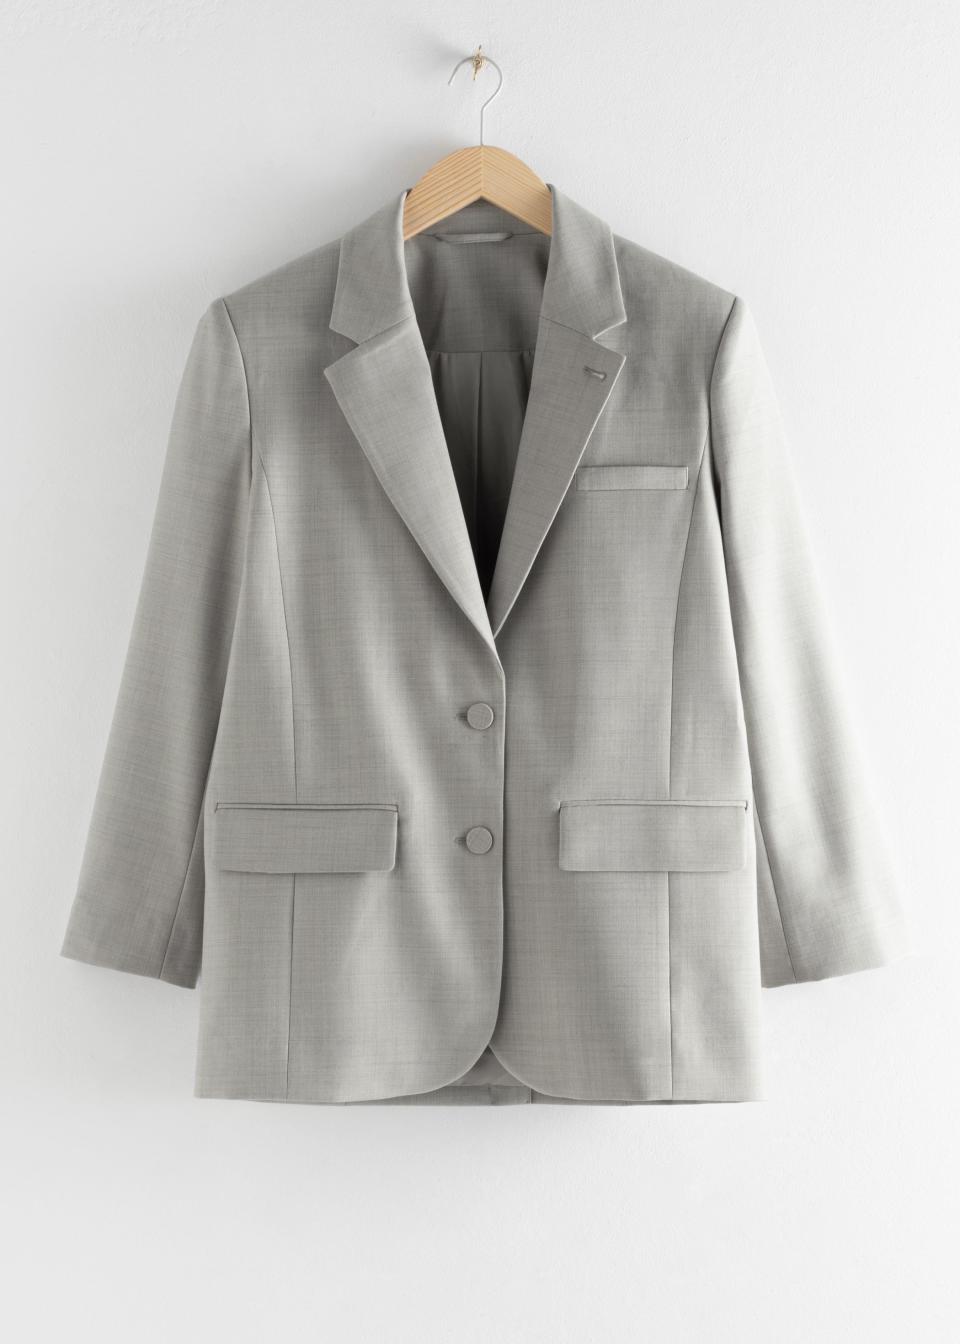 & Other Stories Oversized Wool Blend Tailored Blazer